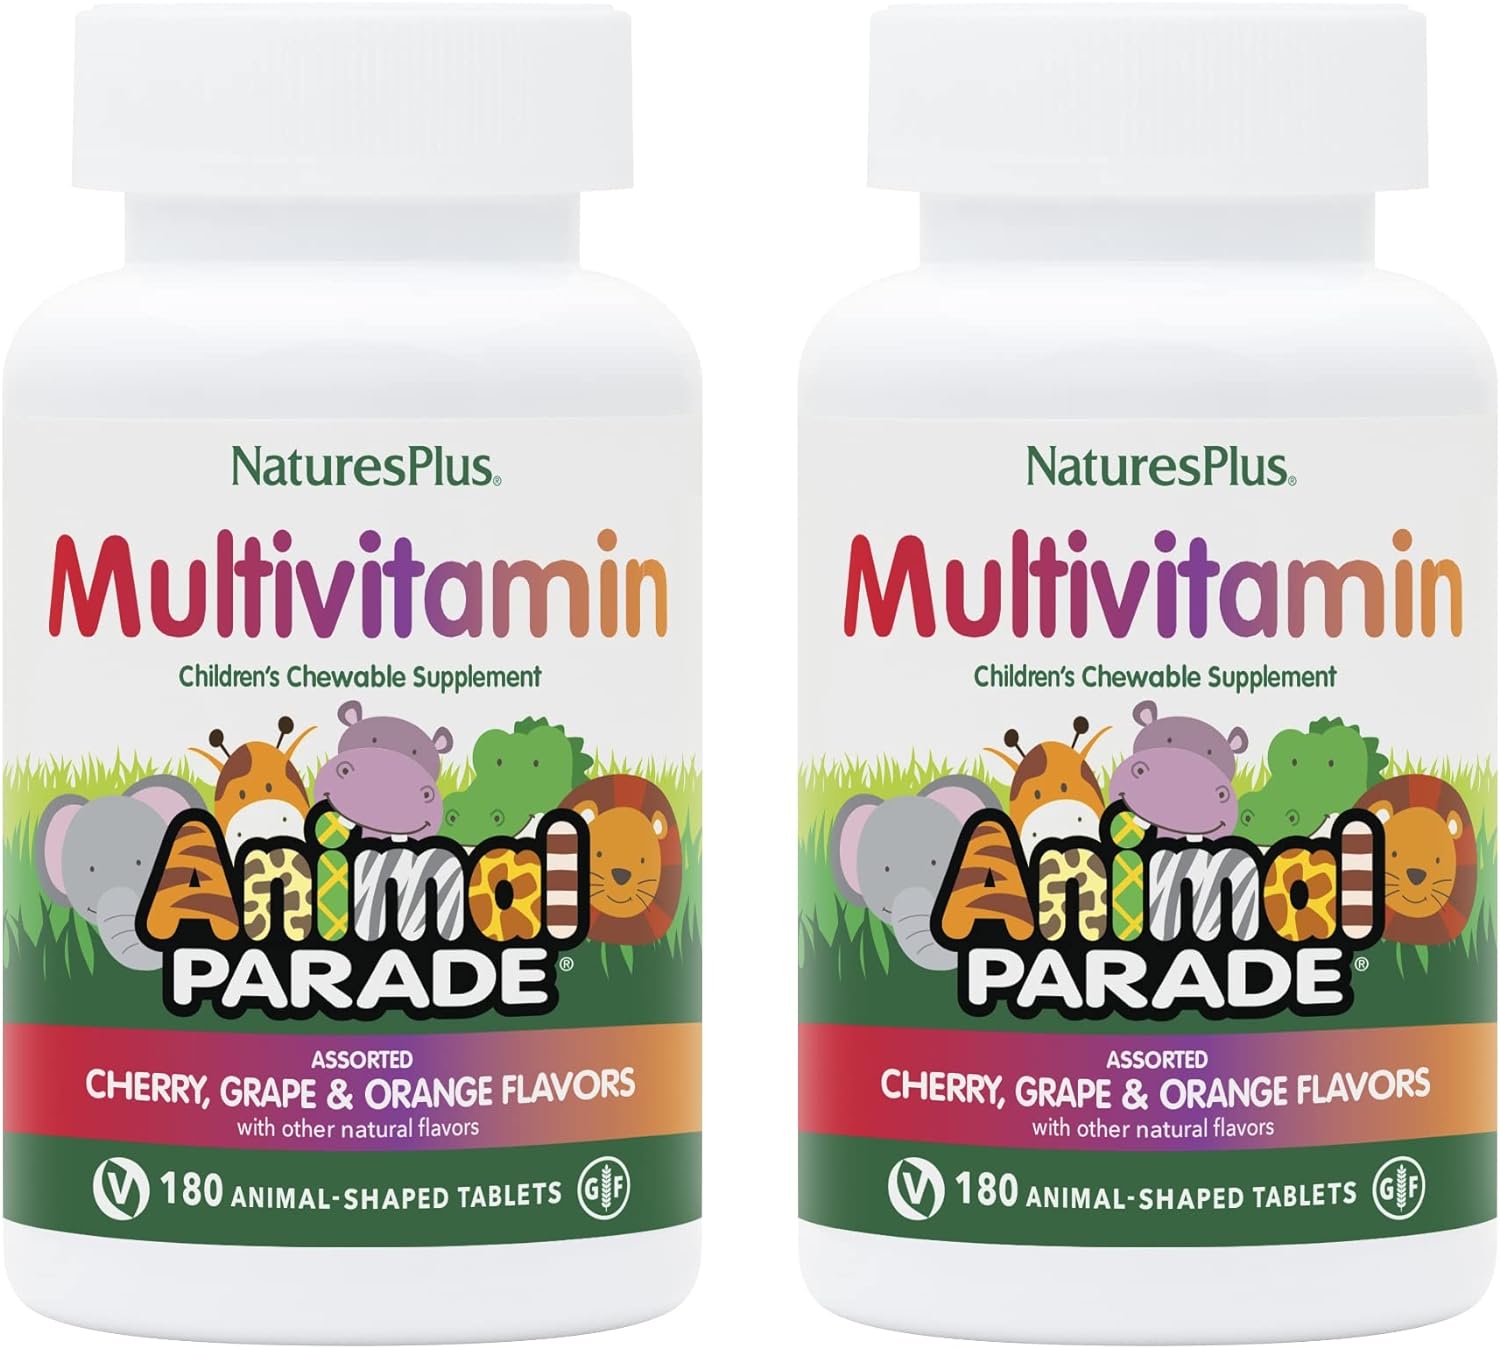 NaturesPlus Animal Parade Childrens Chewable Multivitamin - 180 Animal-Shaped Tablets, Pack of 2 - Natural Assorted Flavors - Vegan, Gluten Free - 180 Total Servings